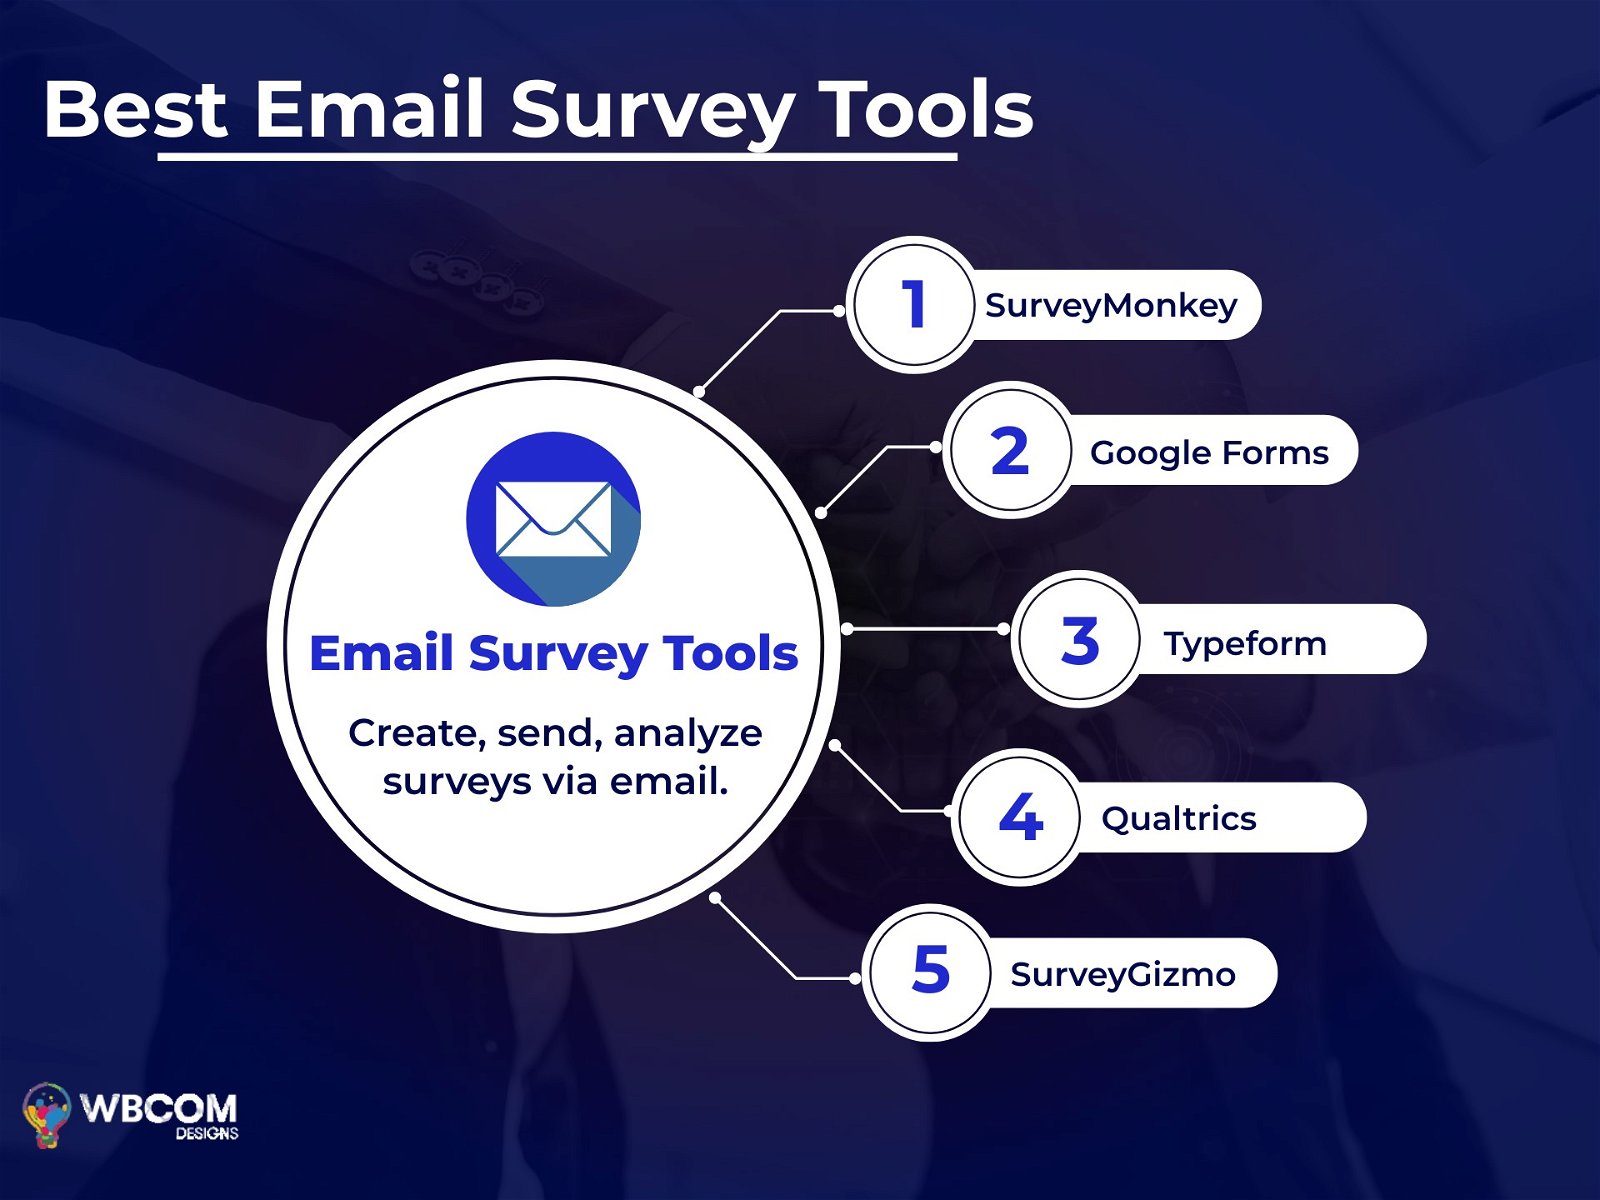 Email Survey Tools